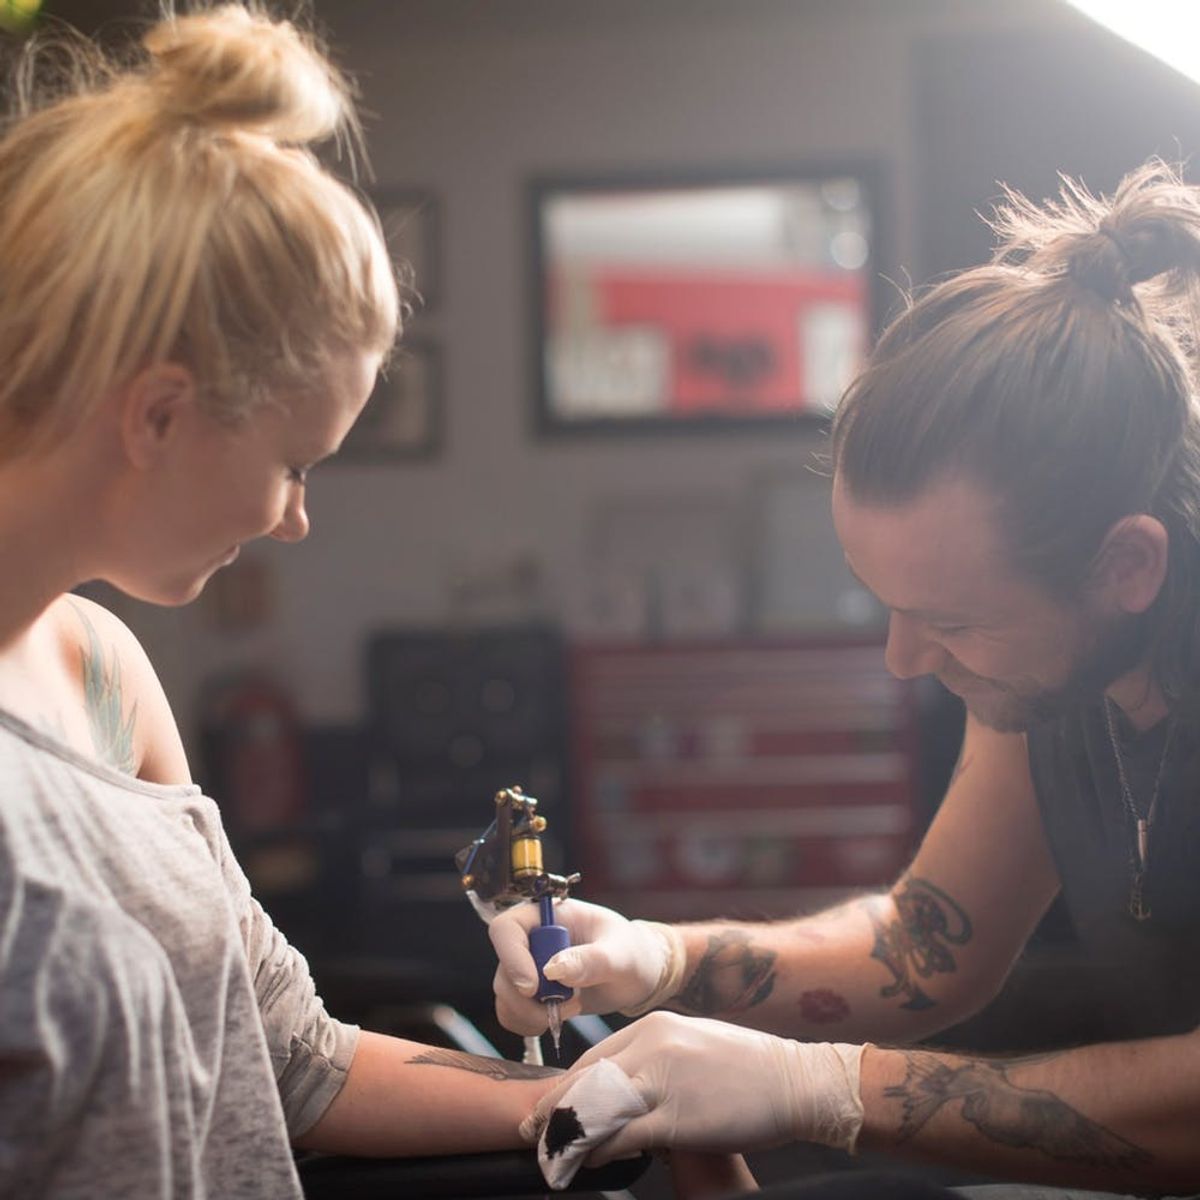 Why You Shouldn’t Get That Tattoo (At Least Not Right Now)